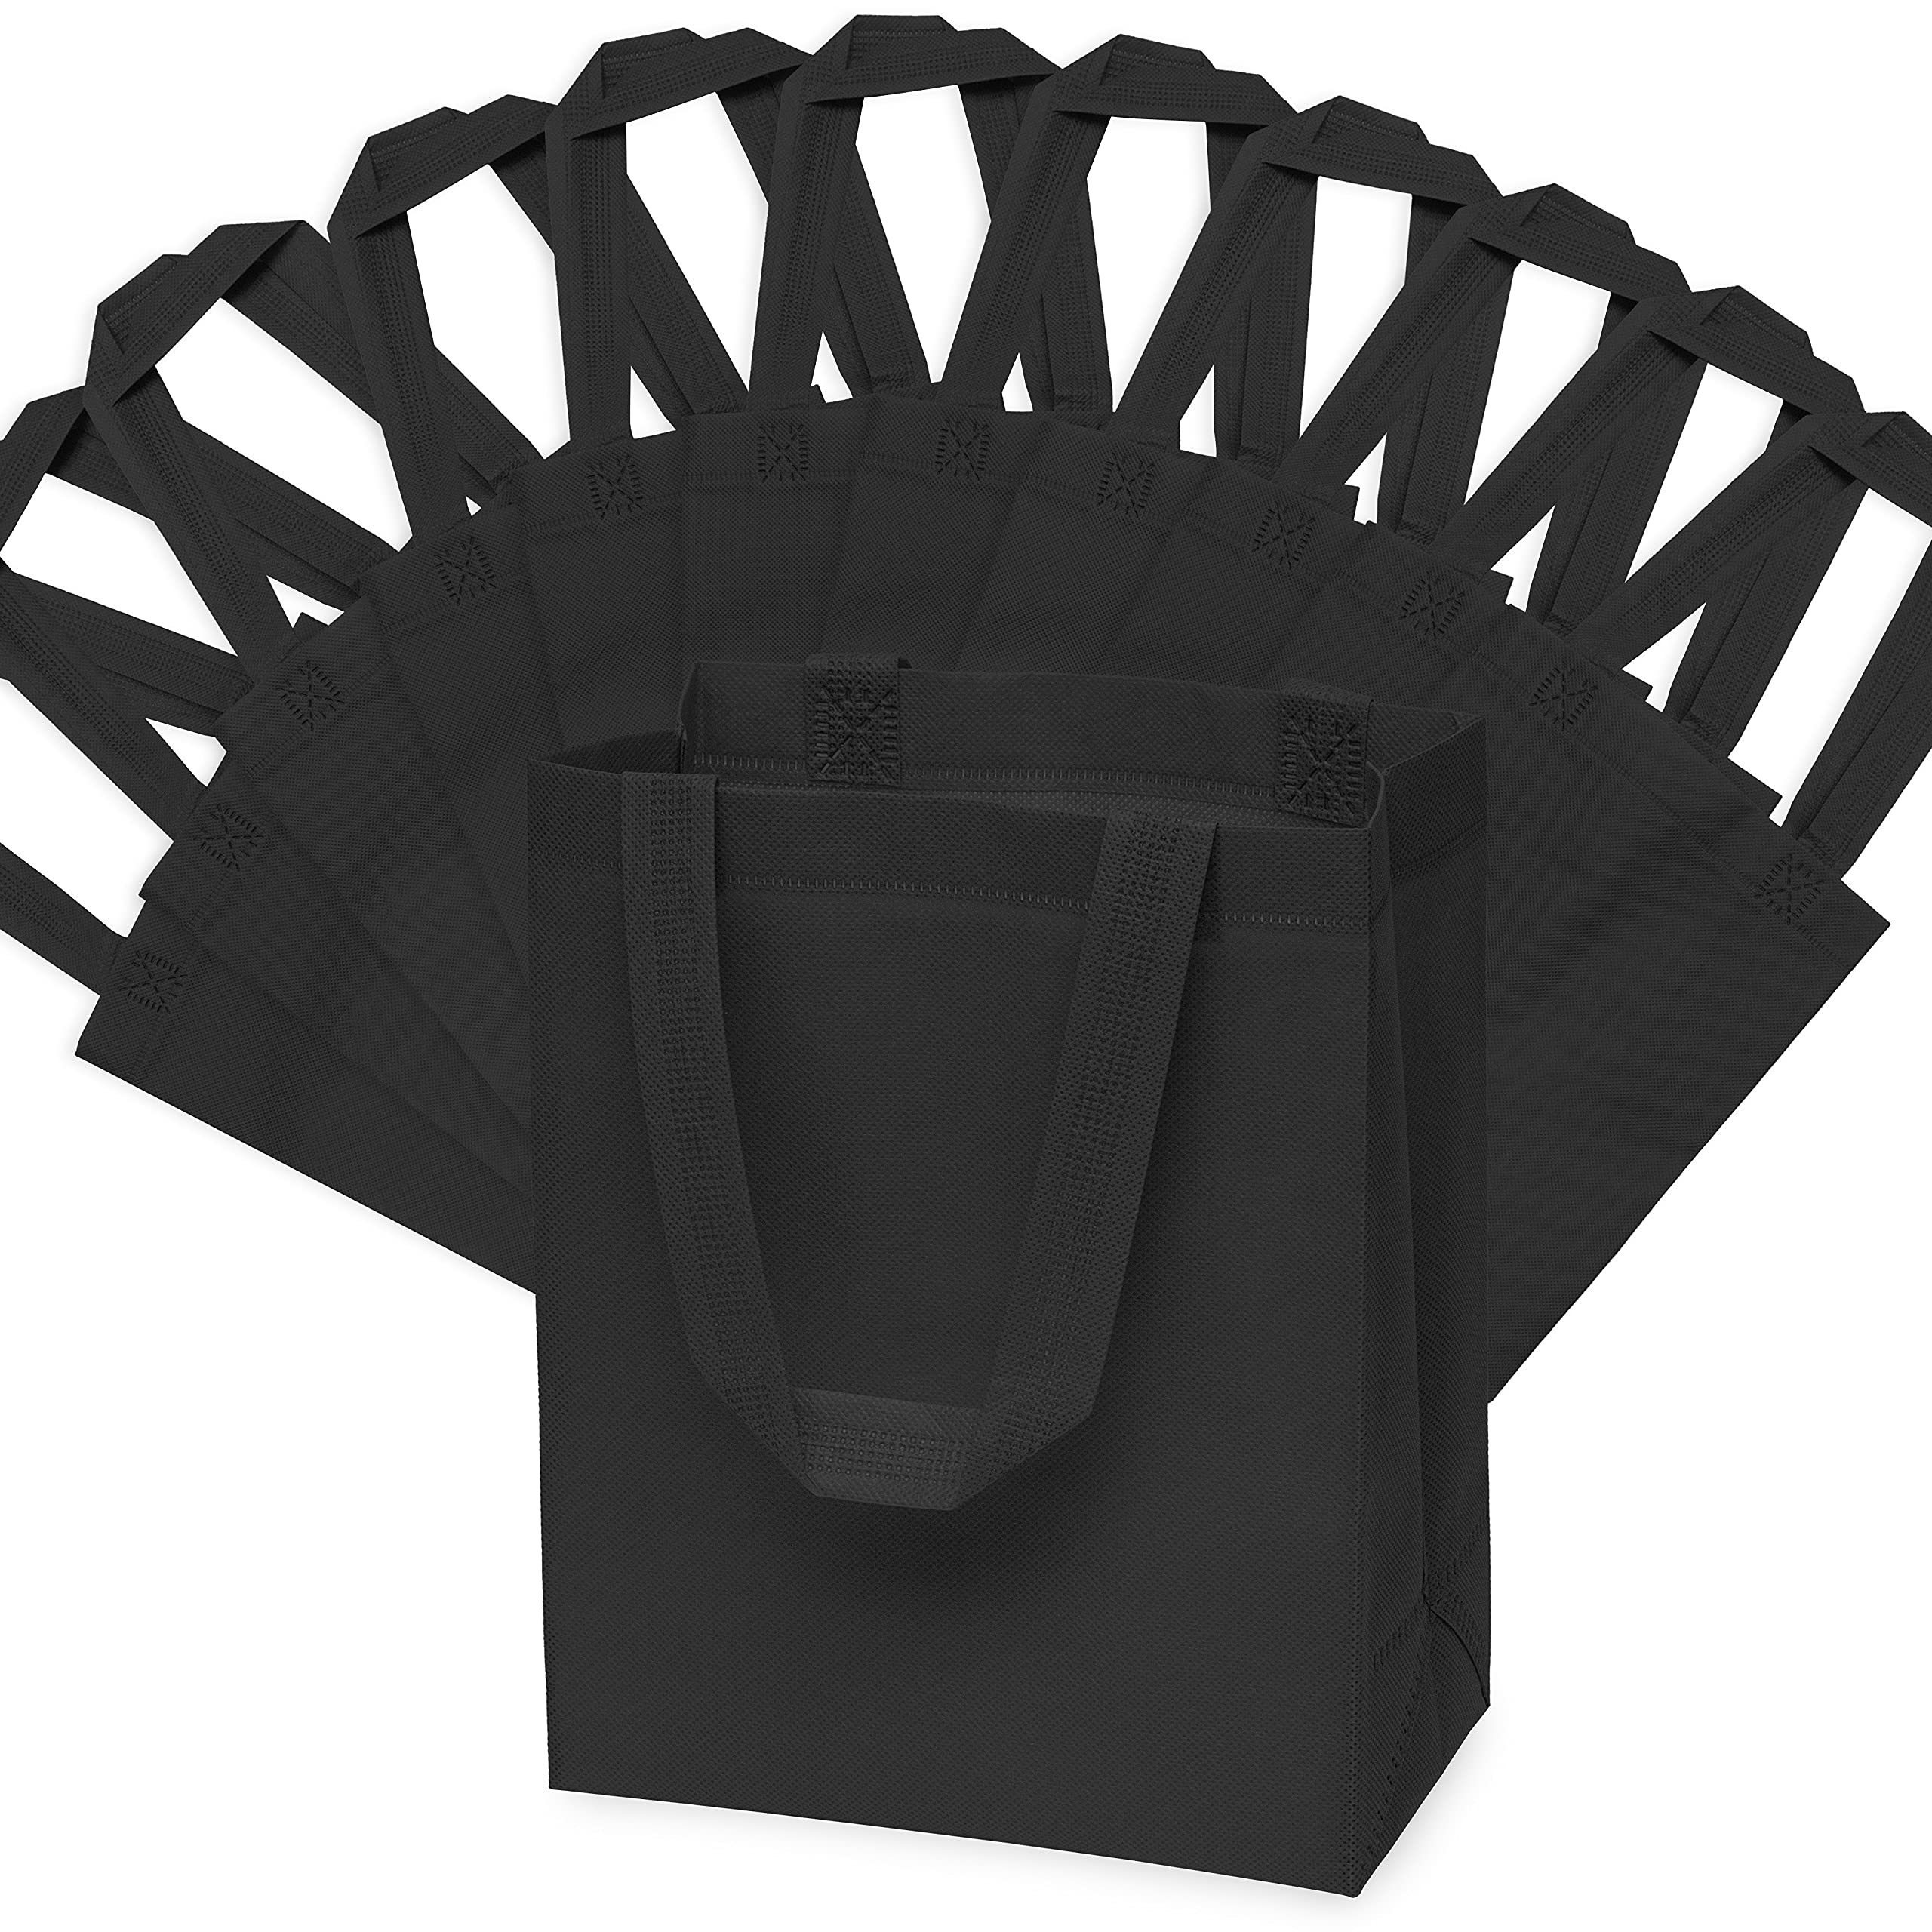 100pcs Black Thank You Gift Bags, Plastic Bags For Festival Birthday Single  Party Wedding Gift Packaging